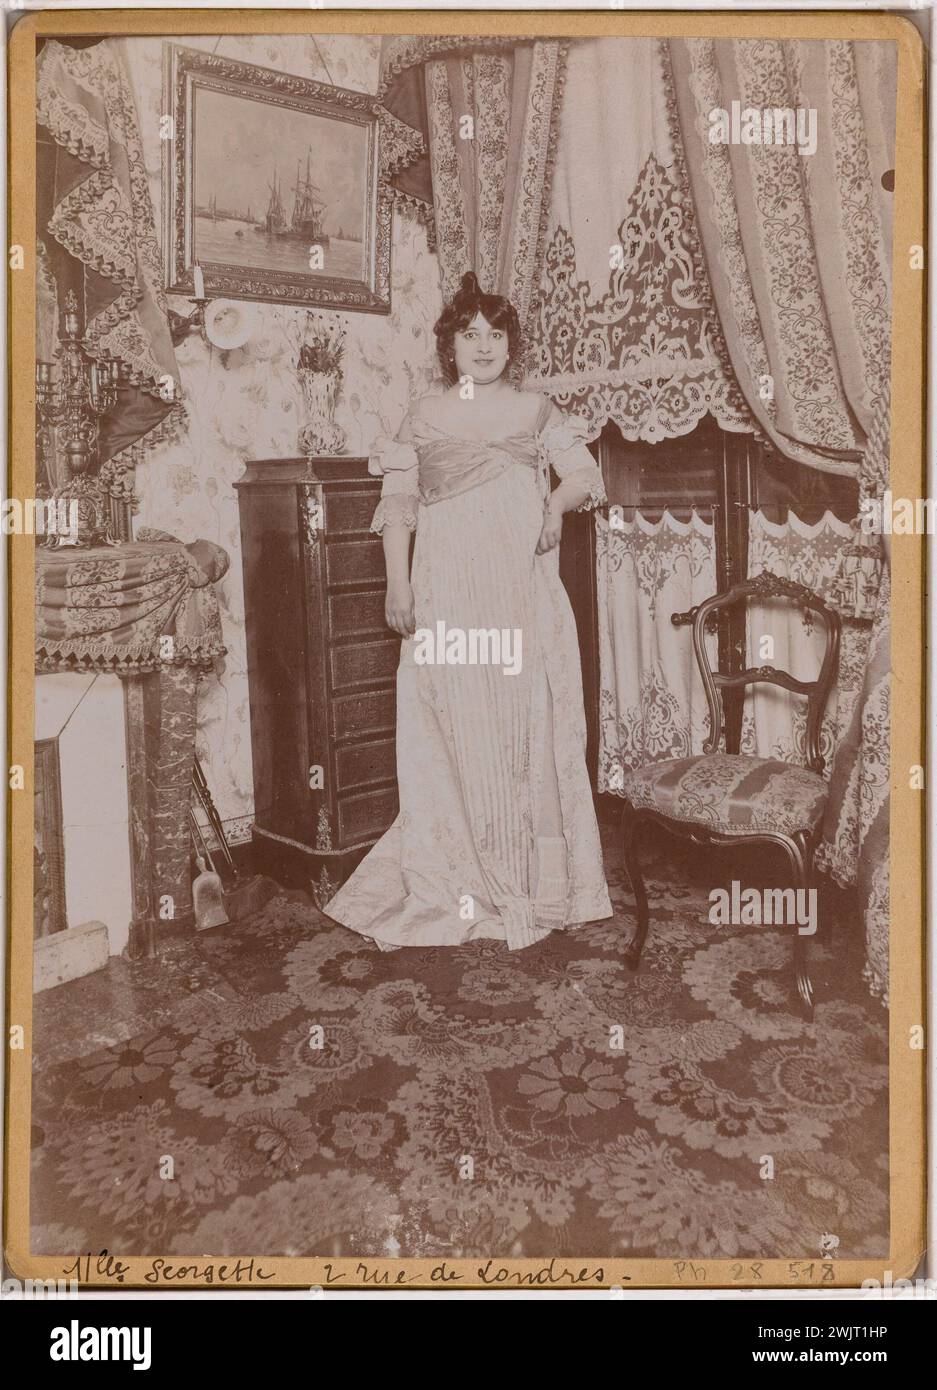 Miss Georgette posing in a brothel, 2 rue de London. Paris (VIIIth arr.). Anonymous photography. Silver gelatin-chloride draw. Around 1900-1900. Paris, Carnavalet museum. 99870-13 Stock Photo